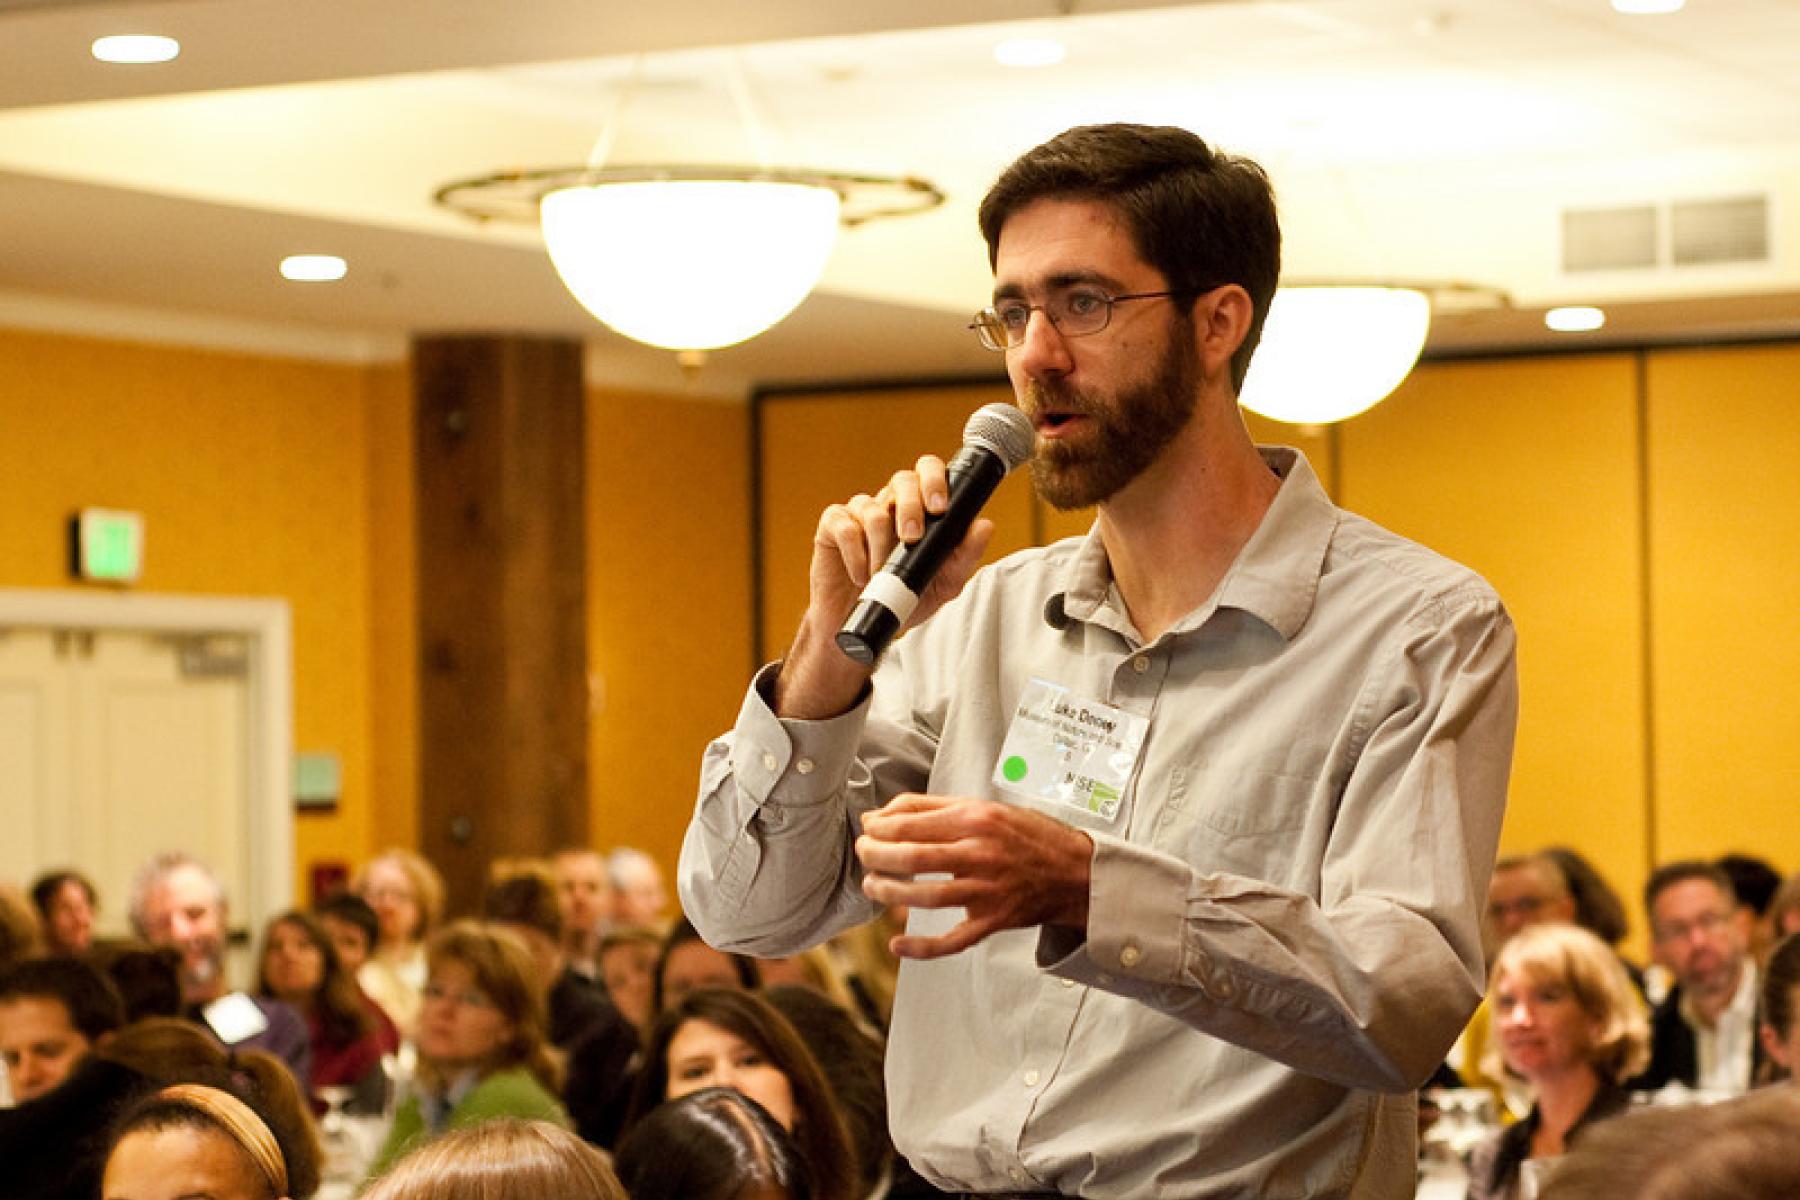 A bearded man in an audience talking on a microphone seemingly asking a question.